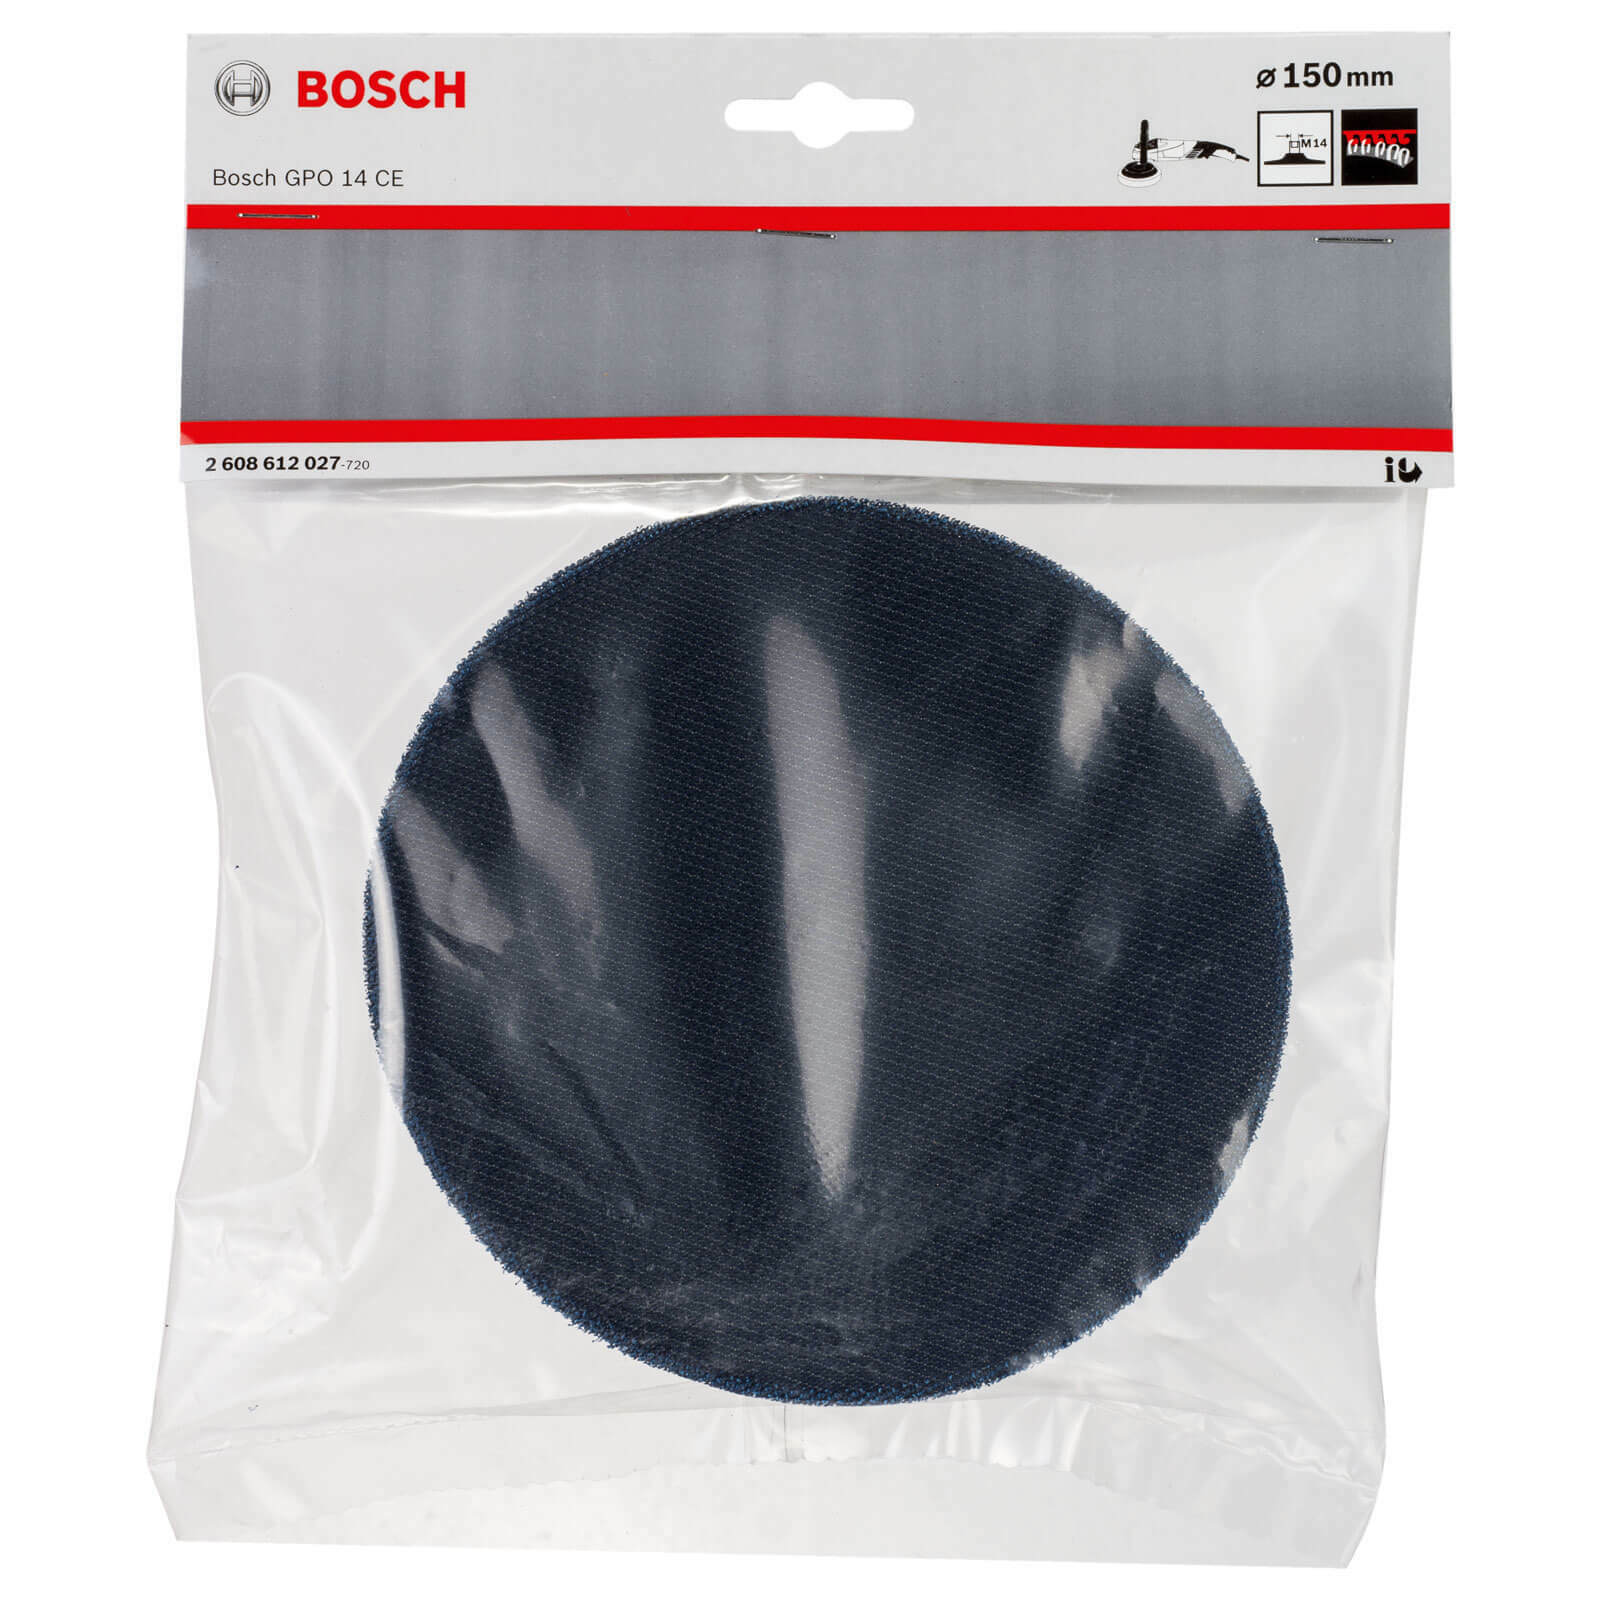 Bosch M14 backing pad 150 mm 2608612027 Power Tool Services